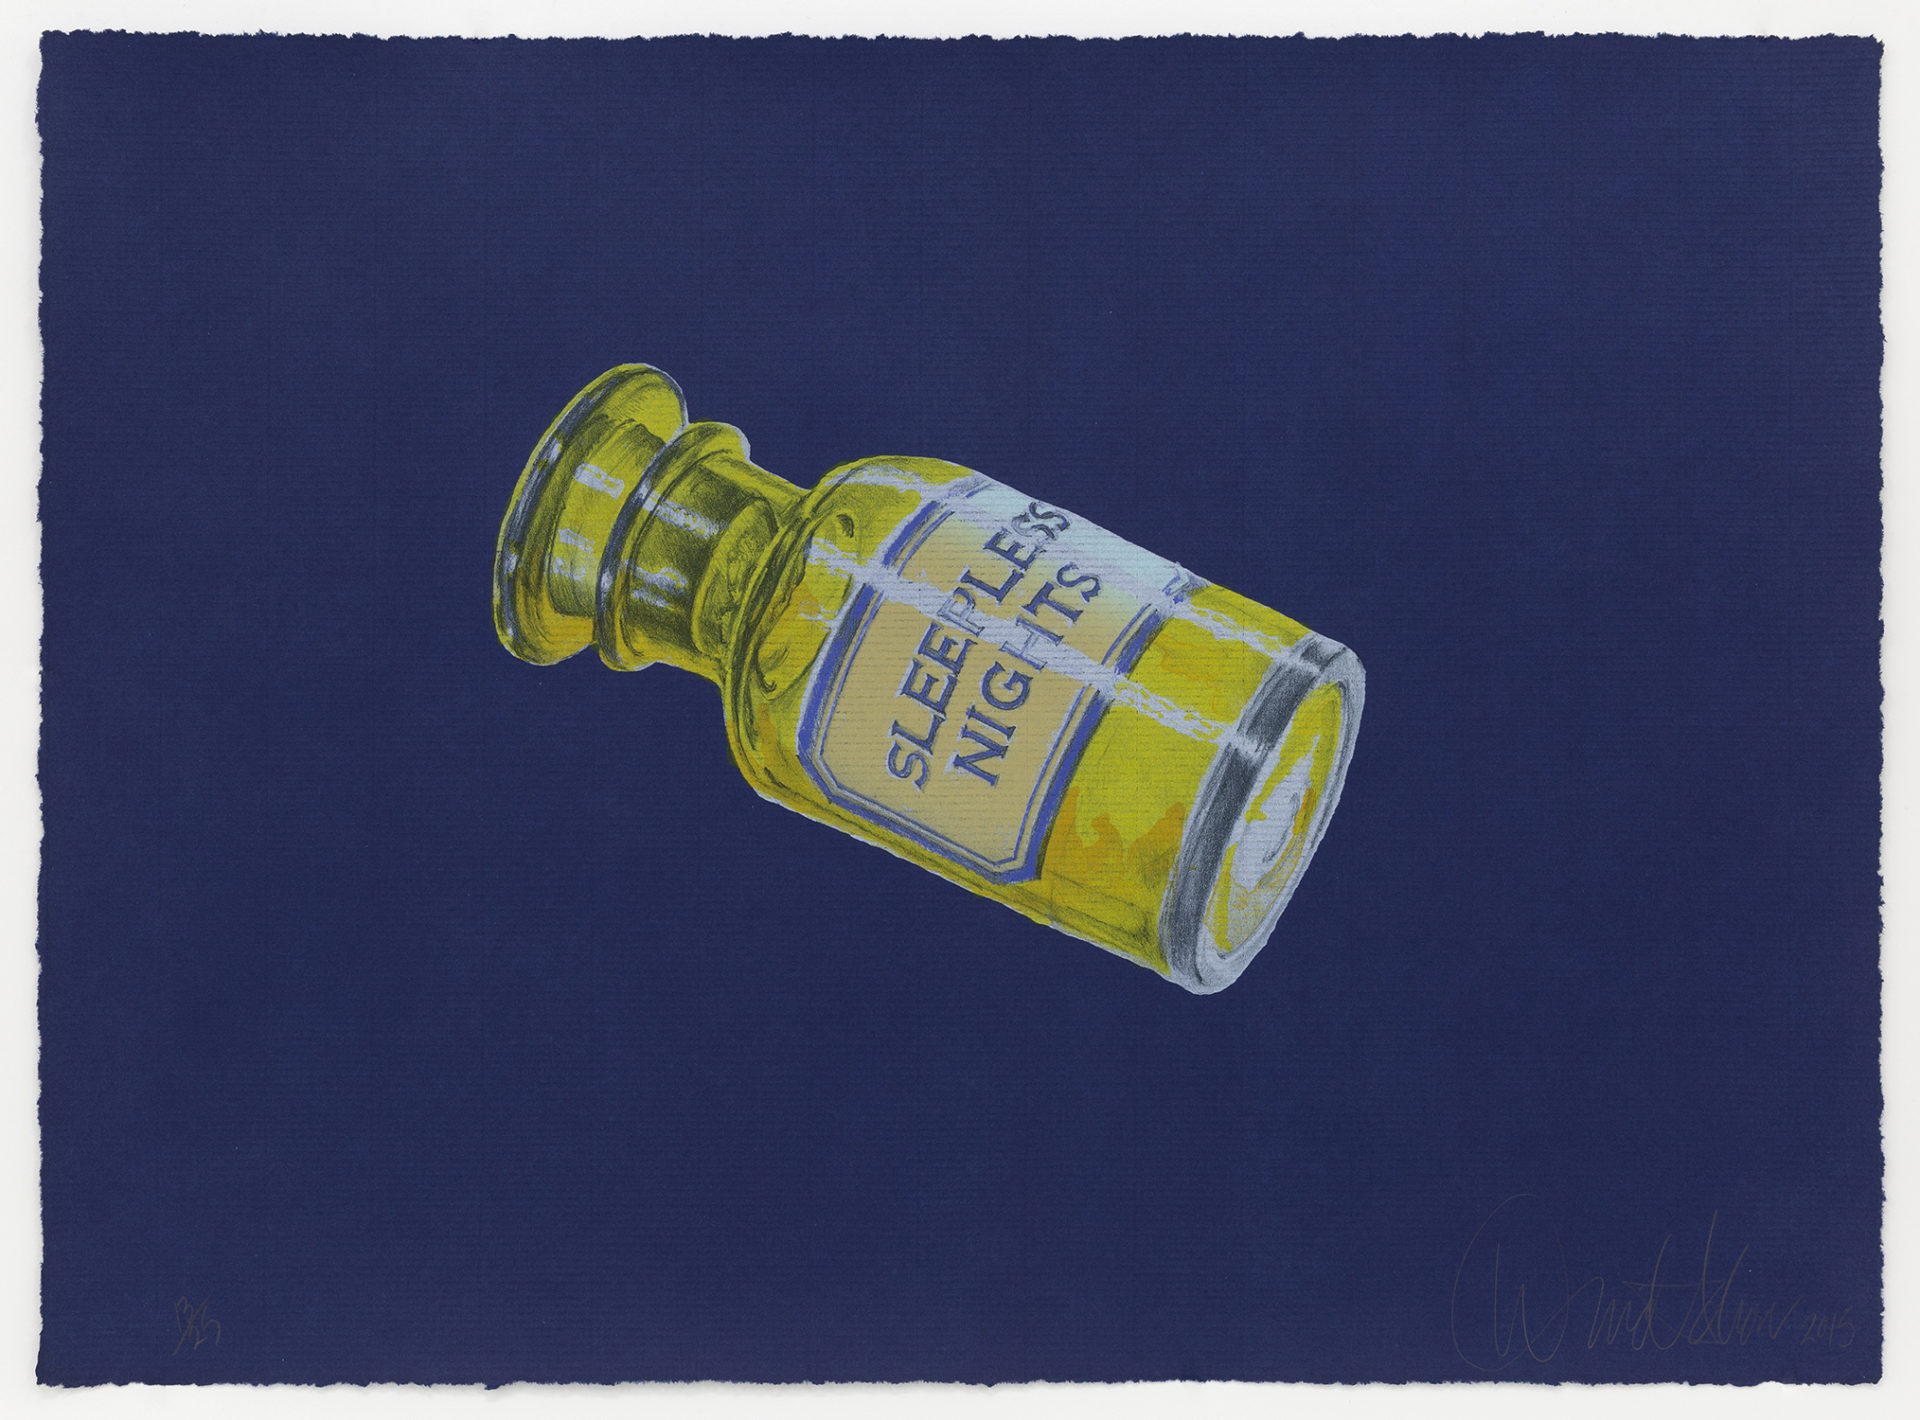 Sleepless Nights, 2015, Lithograph in 8 colors, 19 x 26 inches (48.3 x 66 cm), Edition of 25